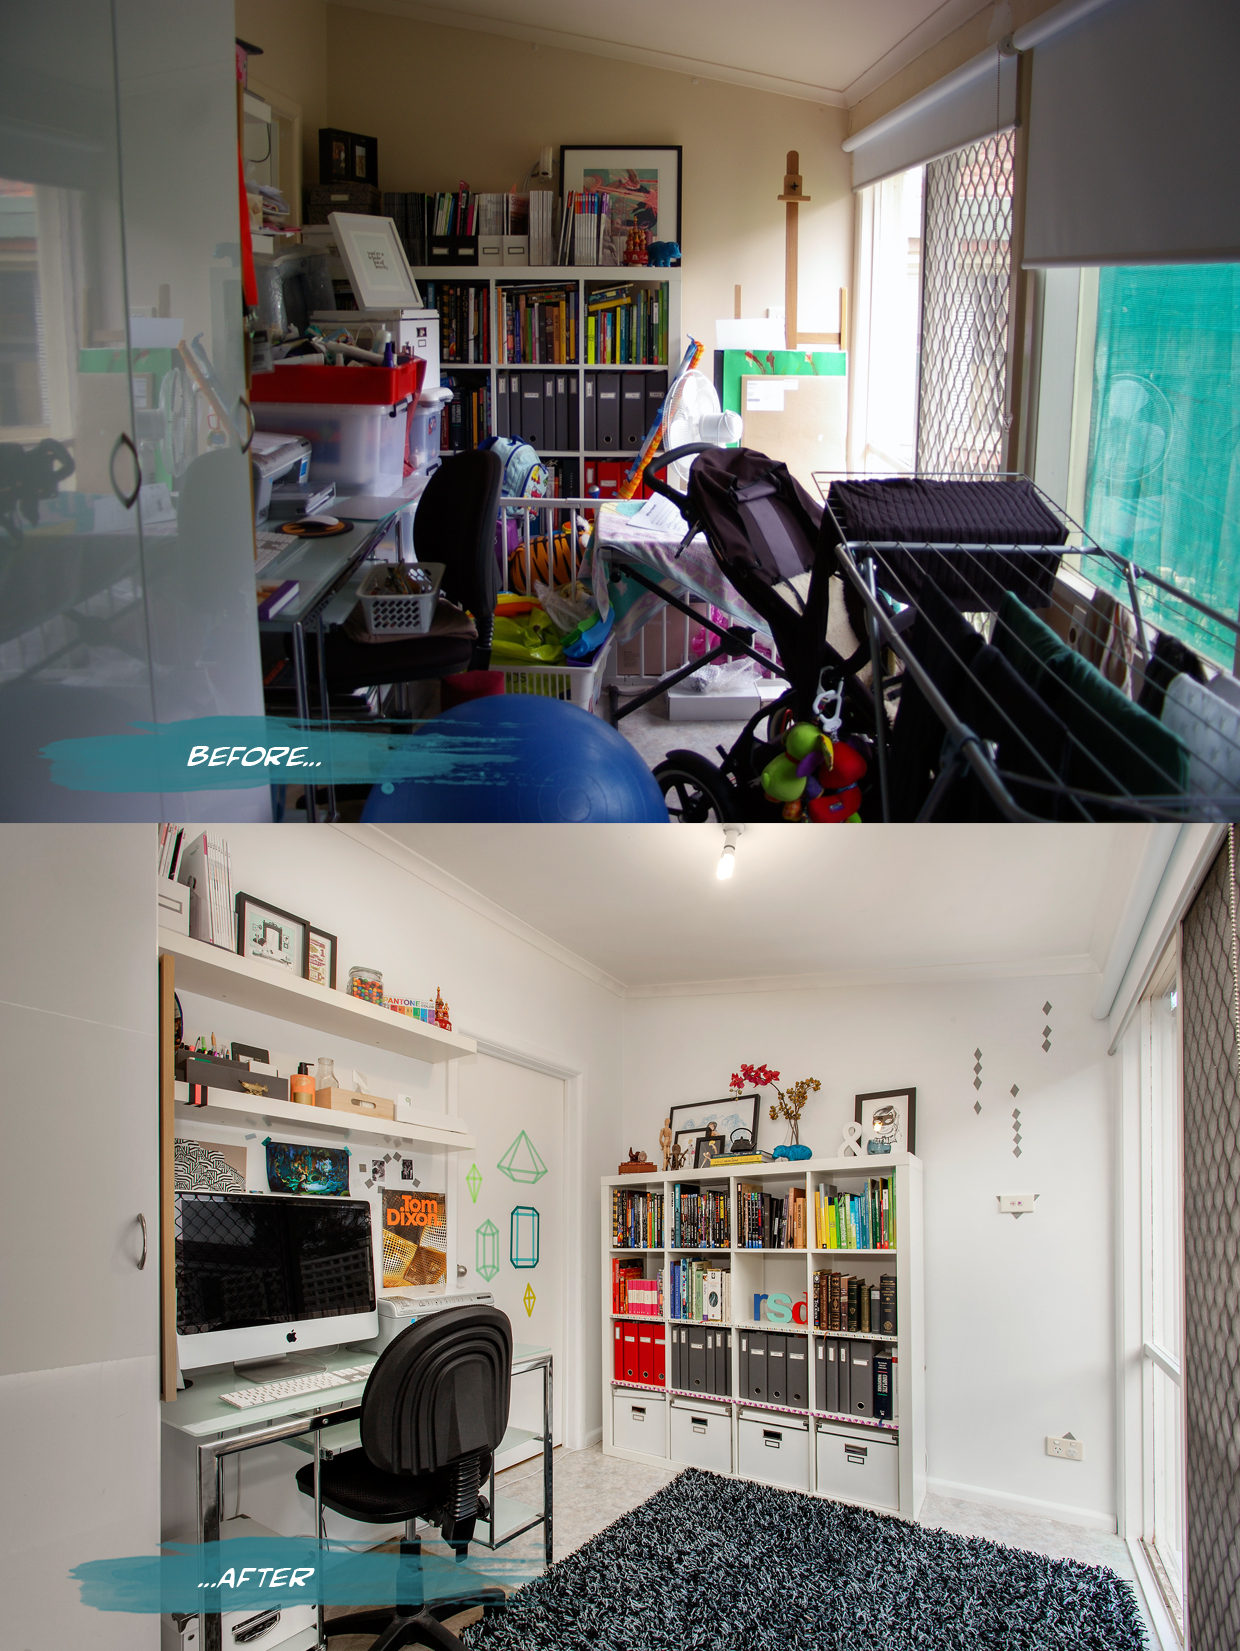 Office before and after on Romona Sandon Designs blog. #interiors #beforeandafter #styling #home #office